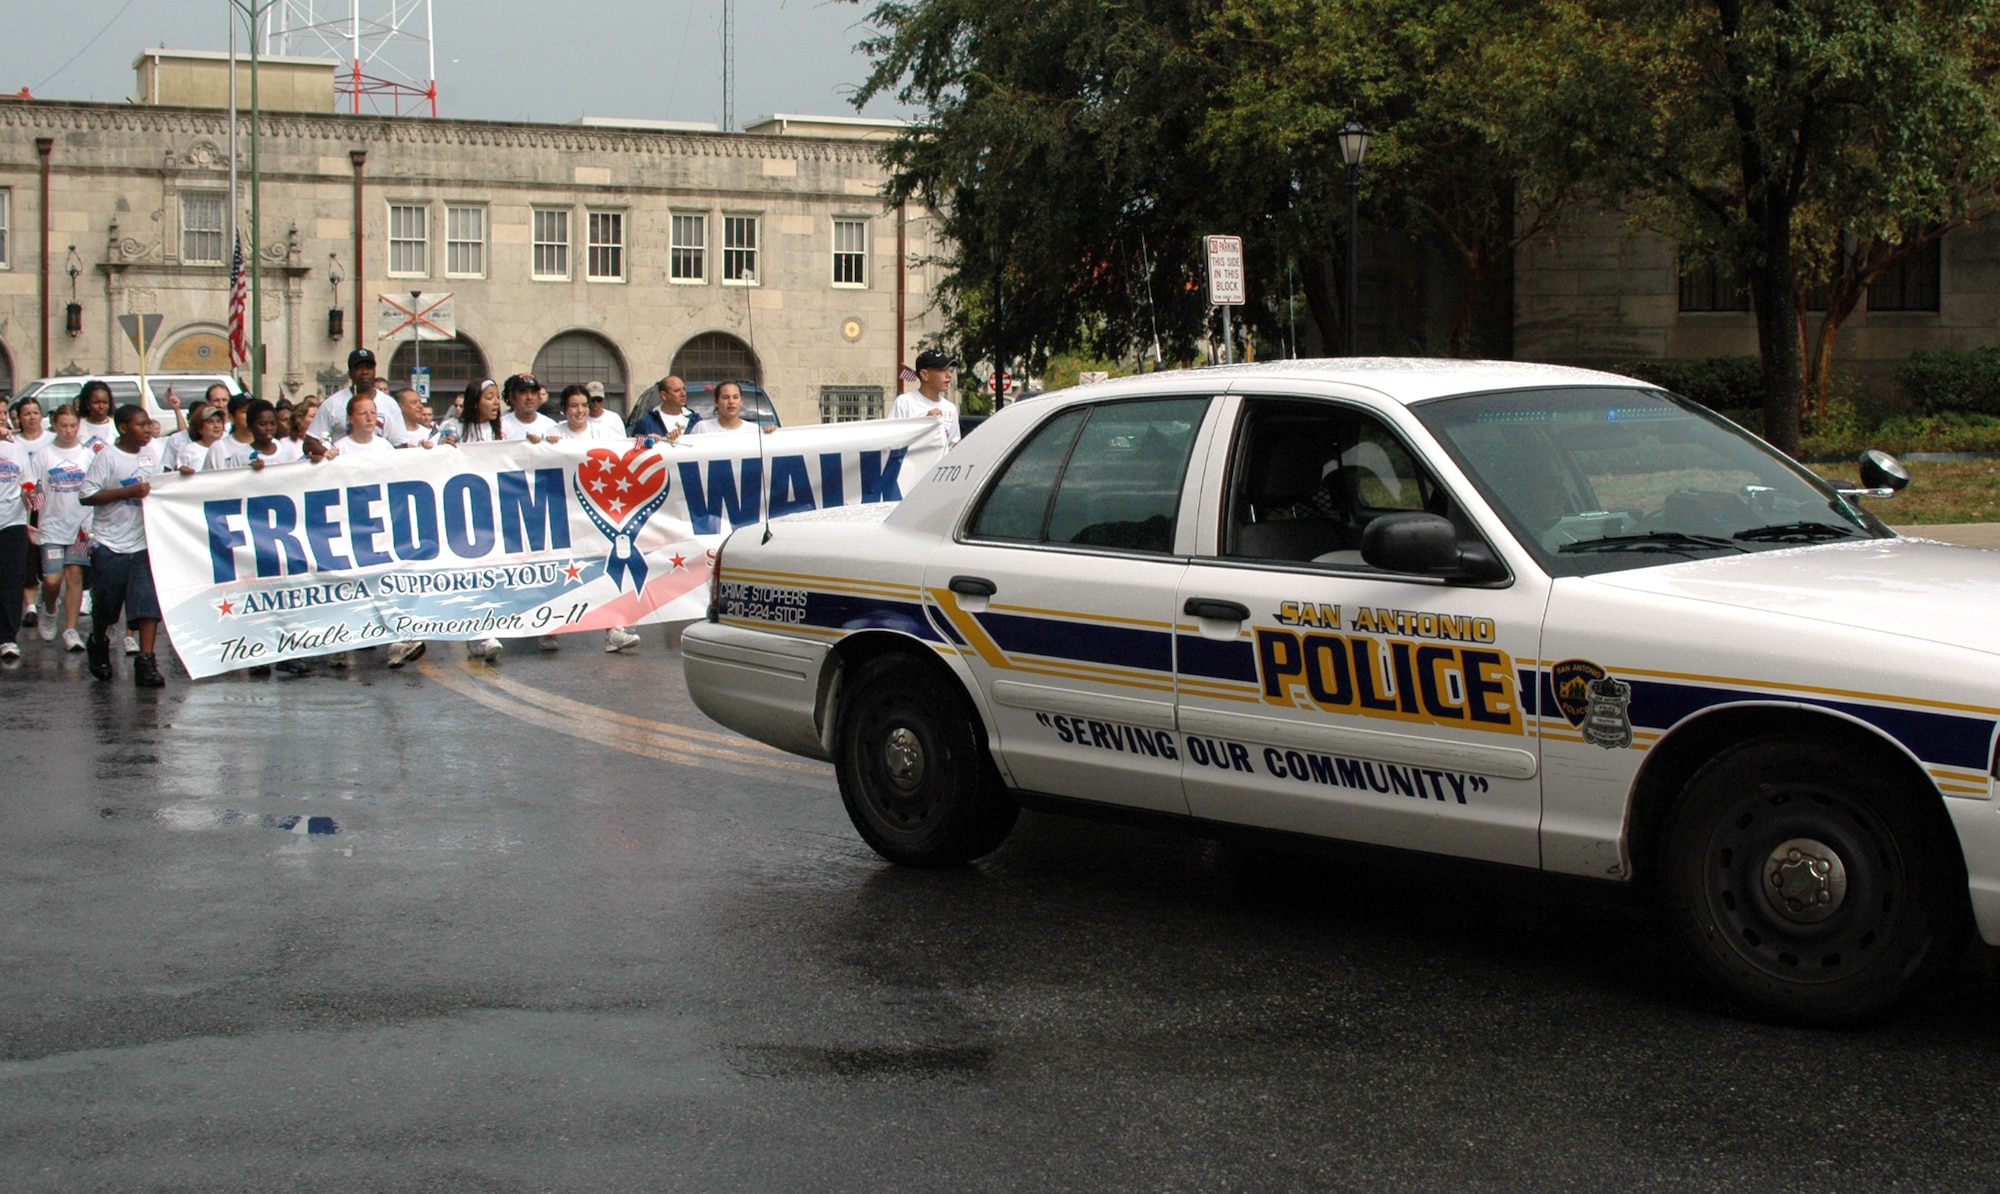 A patrolman from the San Antonio Police Department clears the way for the more than 1,200 servicemembers, civilians and children who braved the rain to participate in the America Supports You Freedom Walk Sept. 11 to pay tribute to those who died on Sept. 11, 2001. (U.S. Air Force photo/Tech. Sgt. Phyllis Duff)